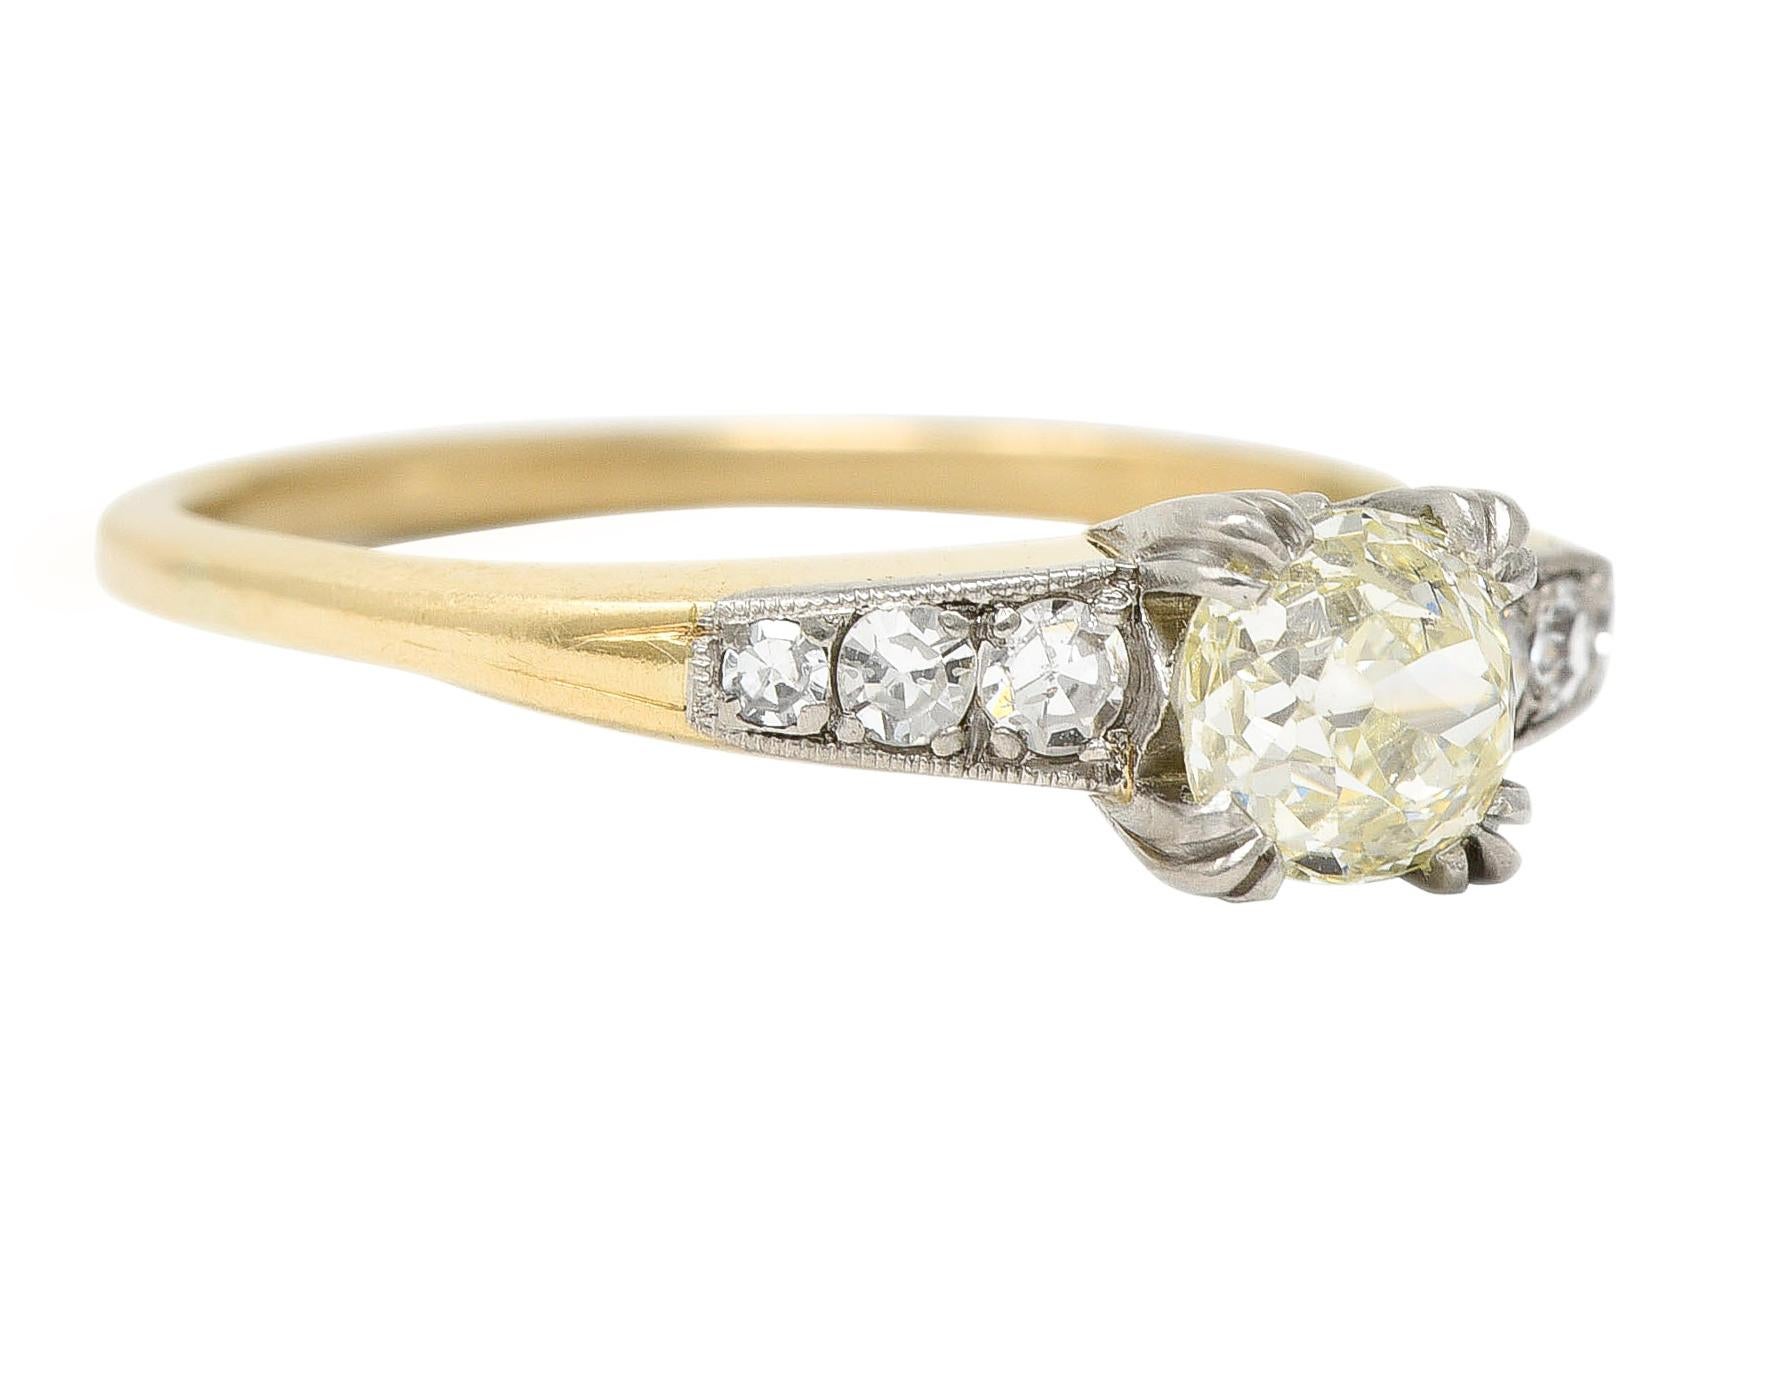 Centering an old European cut diamond weighing approximately 0.58 carats - Light Yellow with VS2 clarity
Set with tri-split prongs in a platinum square form head with 'W' shaped profile 
Flanked by single cut diamonds bead set in platinum shoulders 